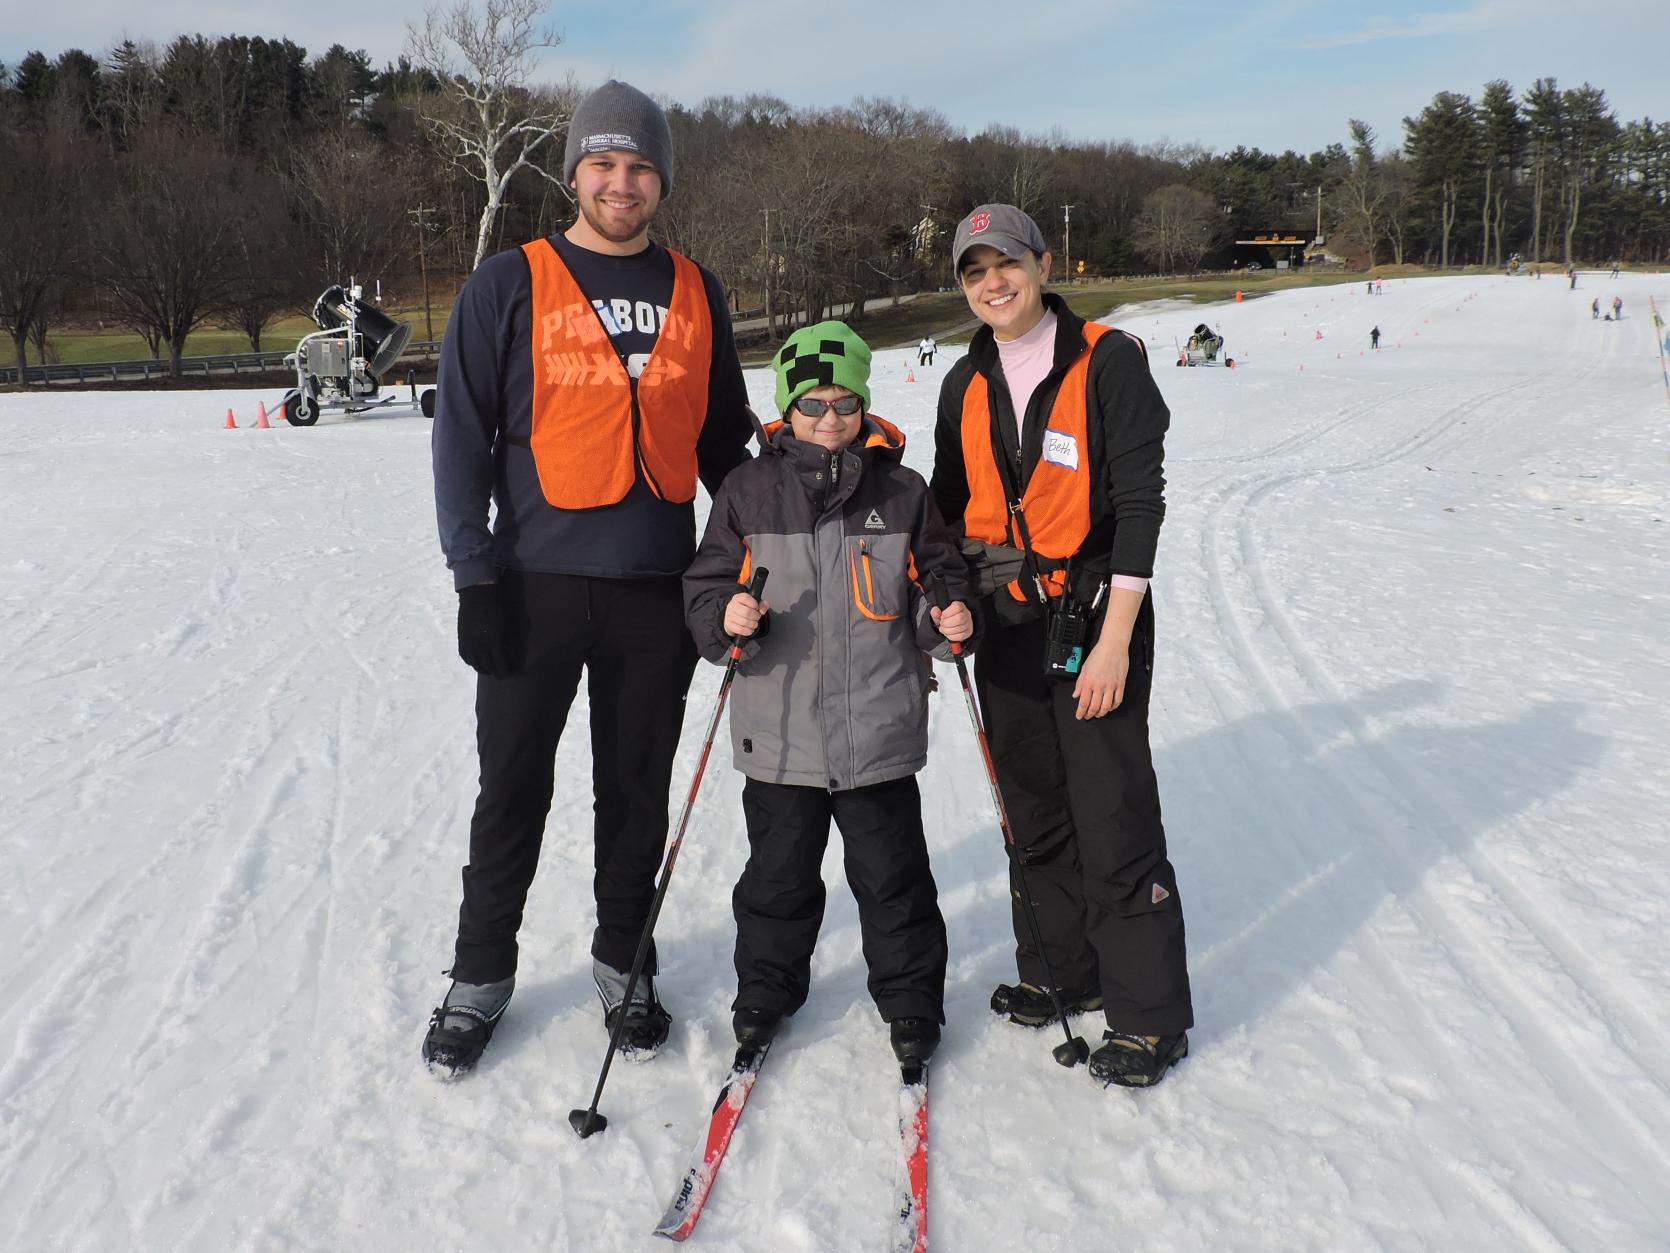 A young skier on a groomed track with two volunteers on either side.